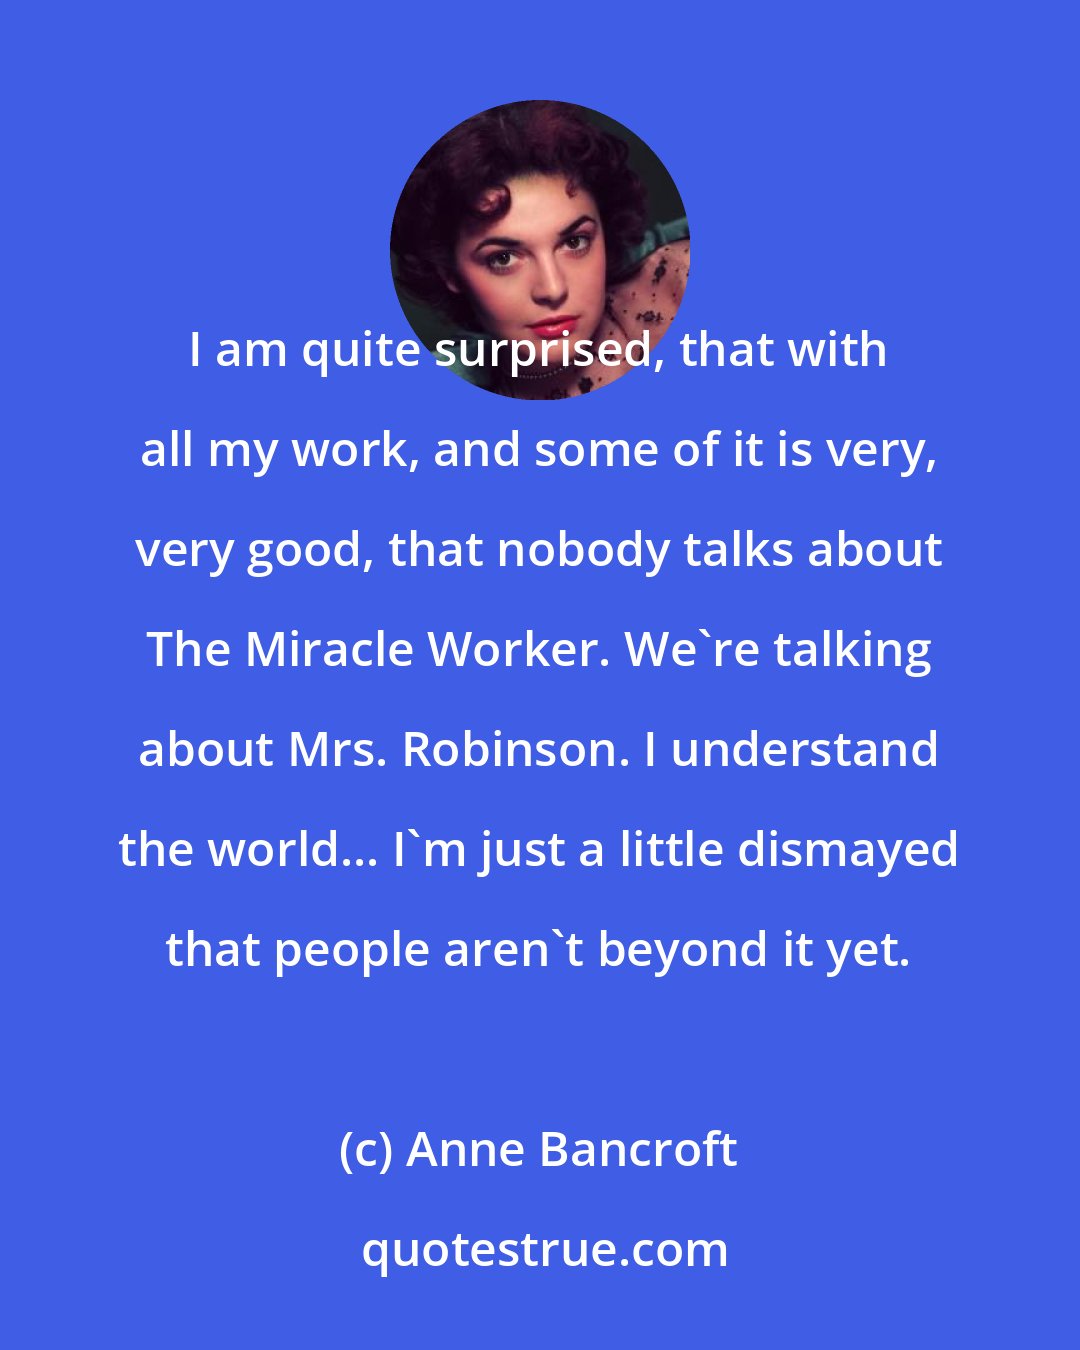 Anne Bancroft: I am quite surprised, that with all my work, and some of it is very, very good, that nobody talks about The Miracle Worker. We're talking about Mrs. Robinson. I understand the world... I'm just a little dismayed that people aren't beyond it yet.